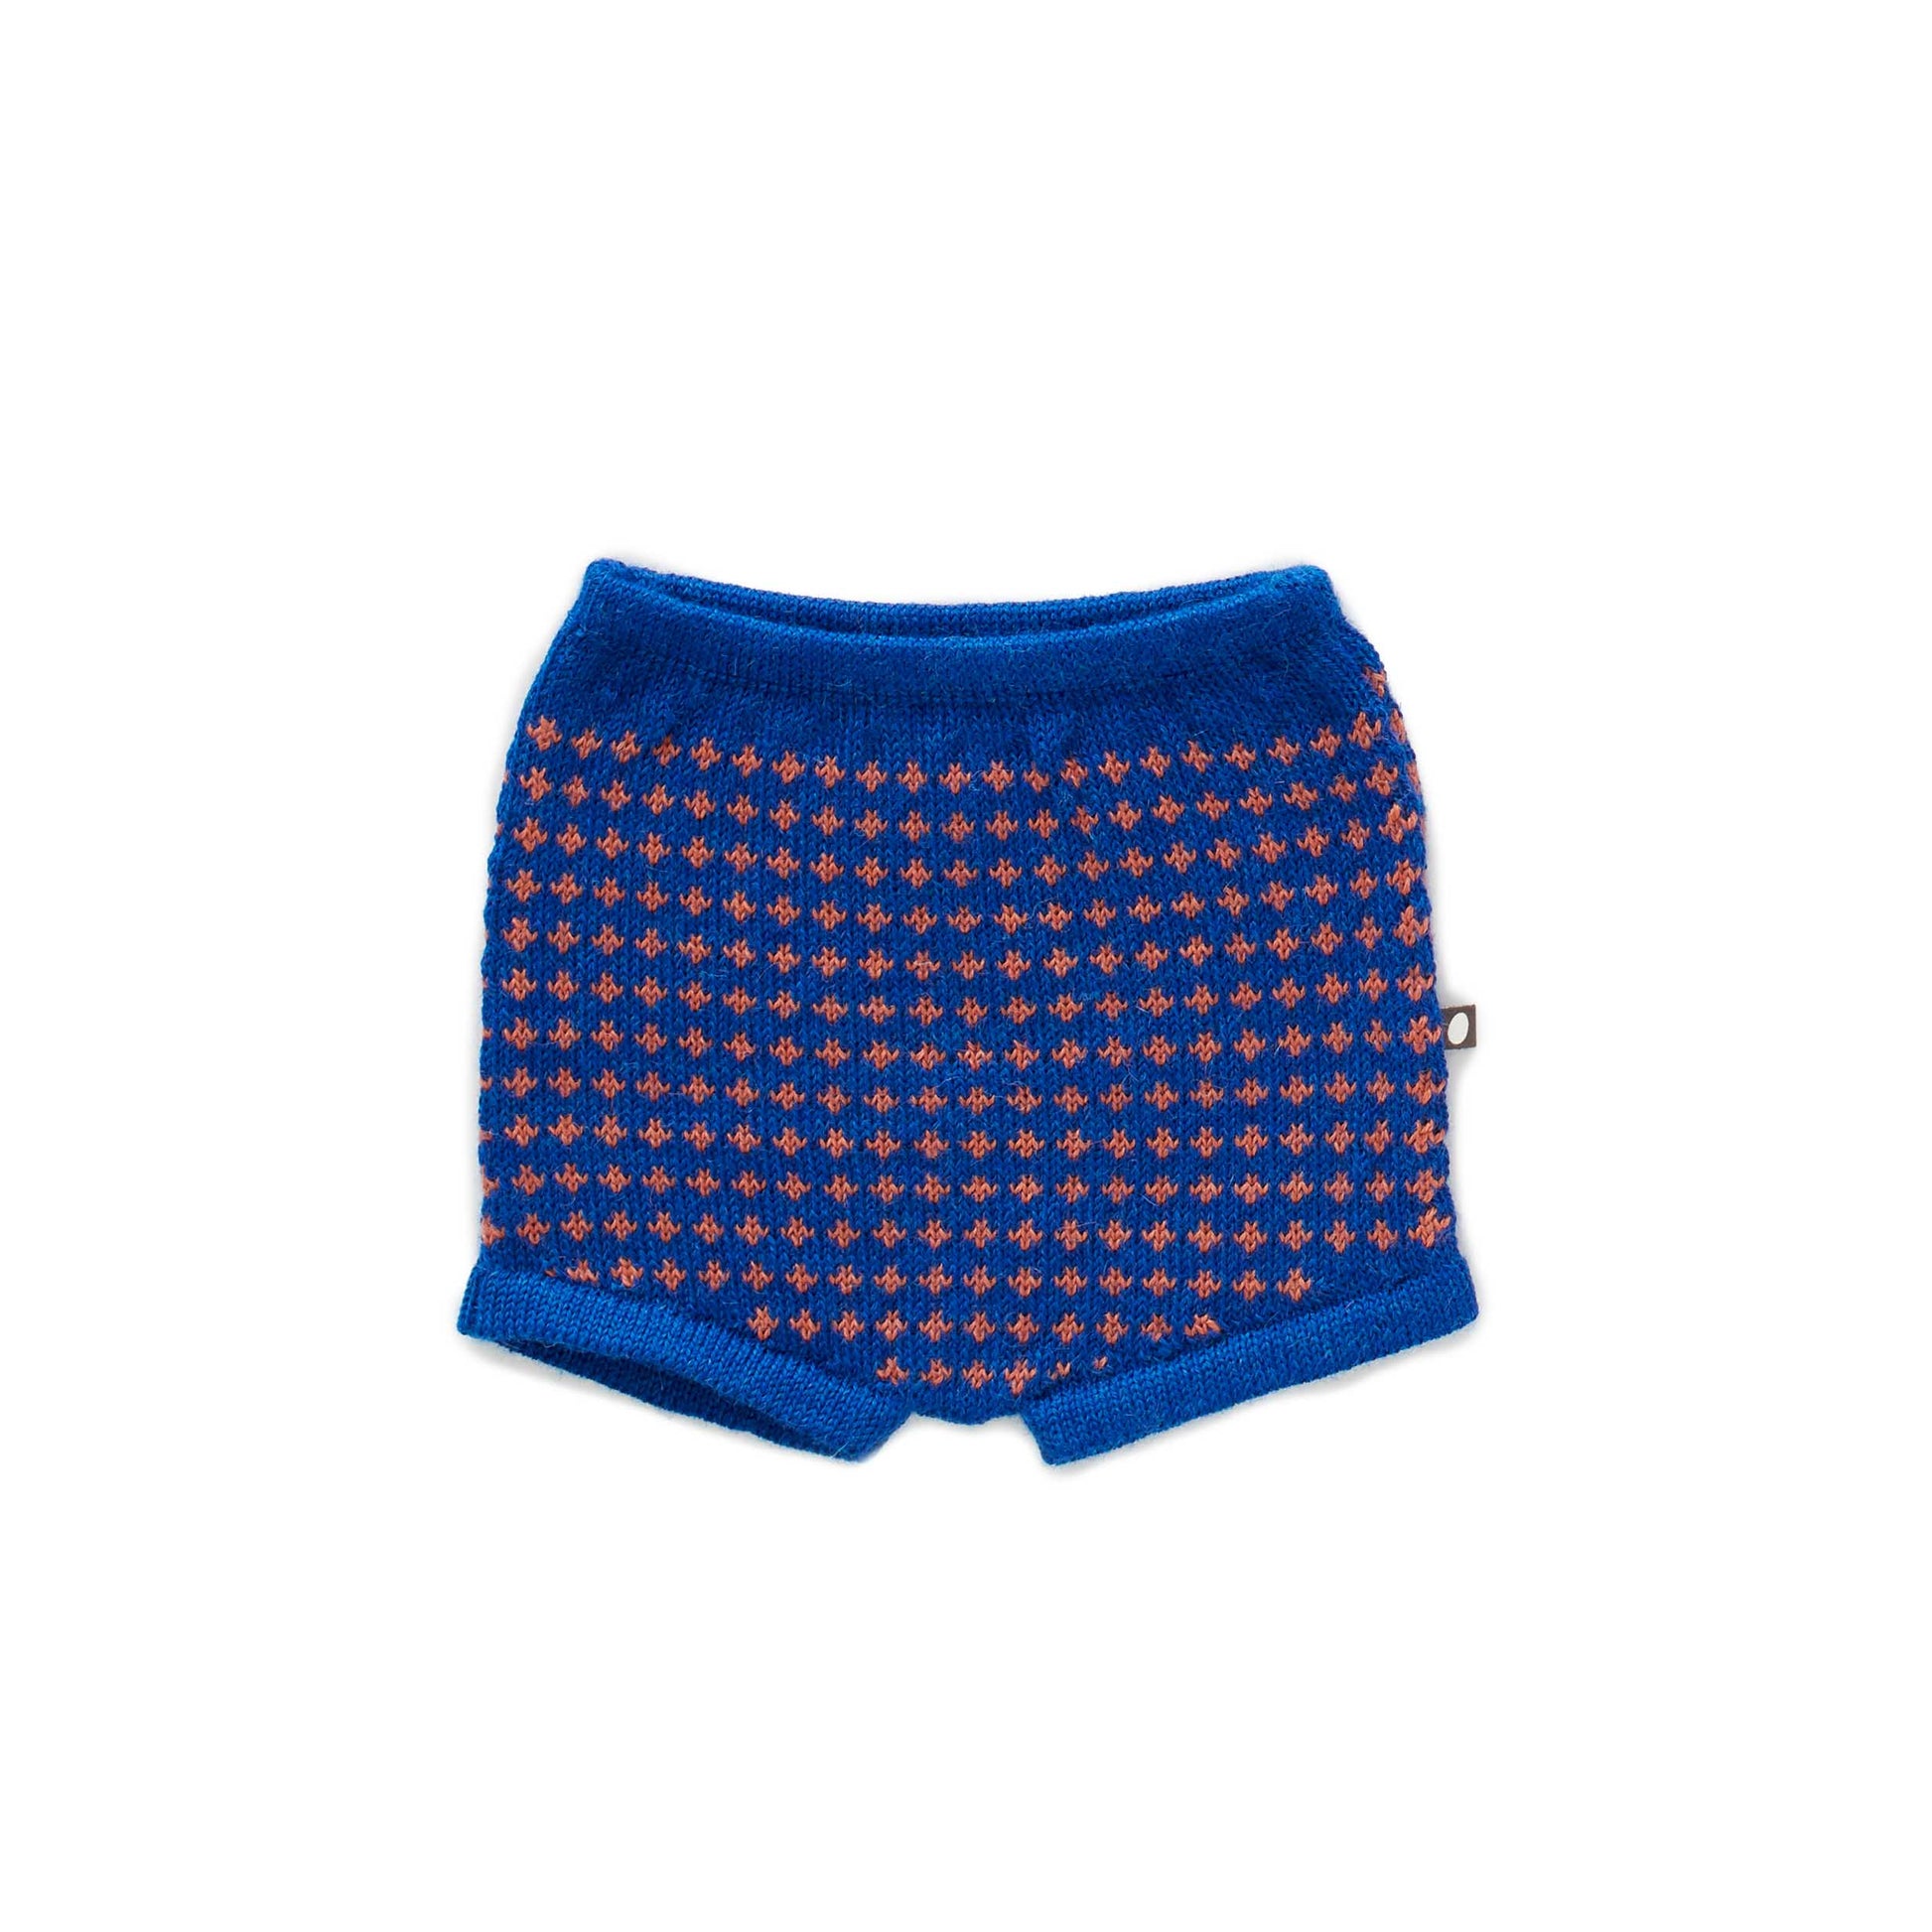 Oeuf Kids bottoms Shorts-Electric Blue/Apricot - Ever Simplicity